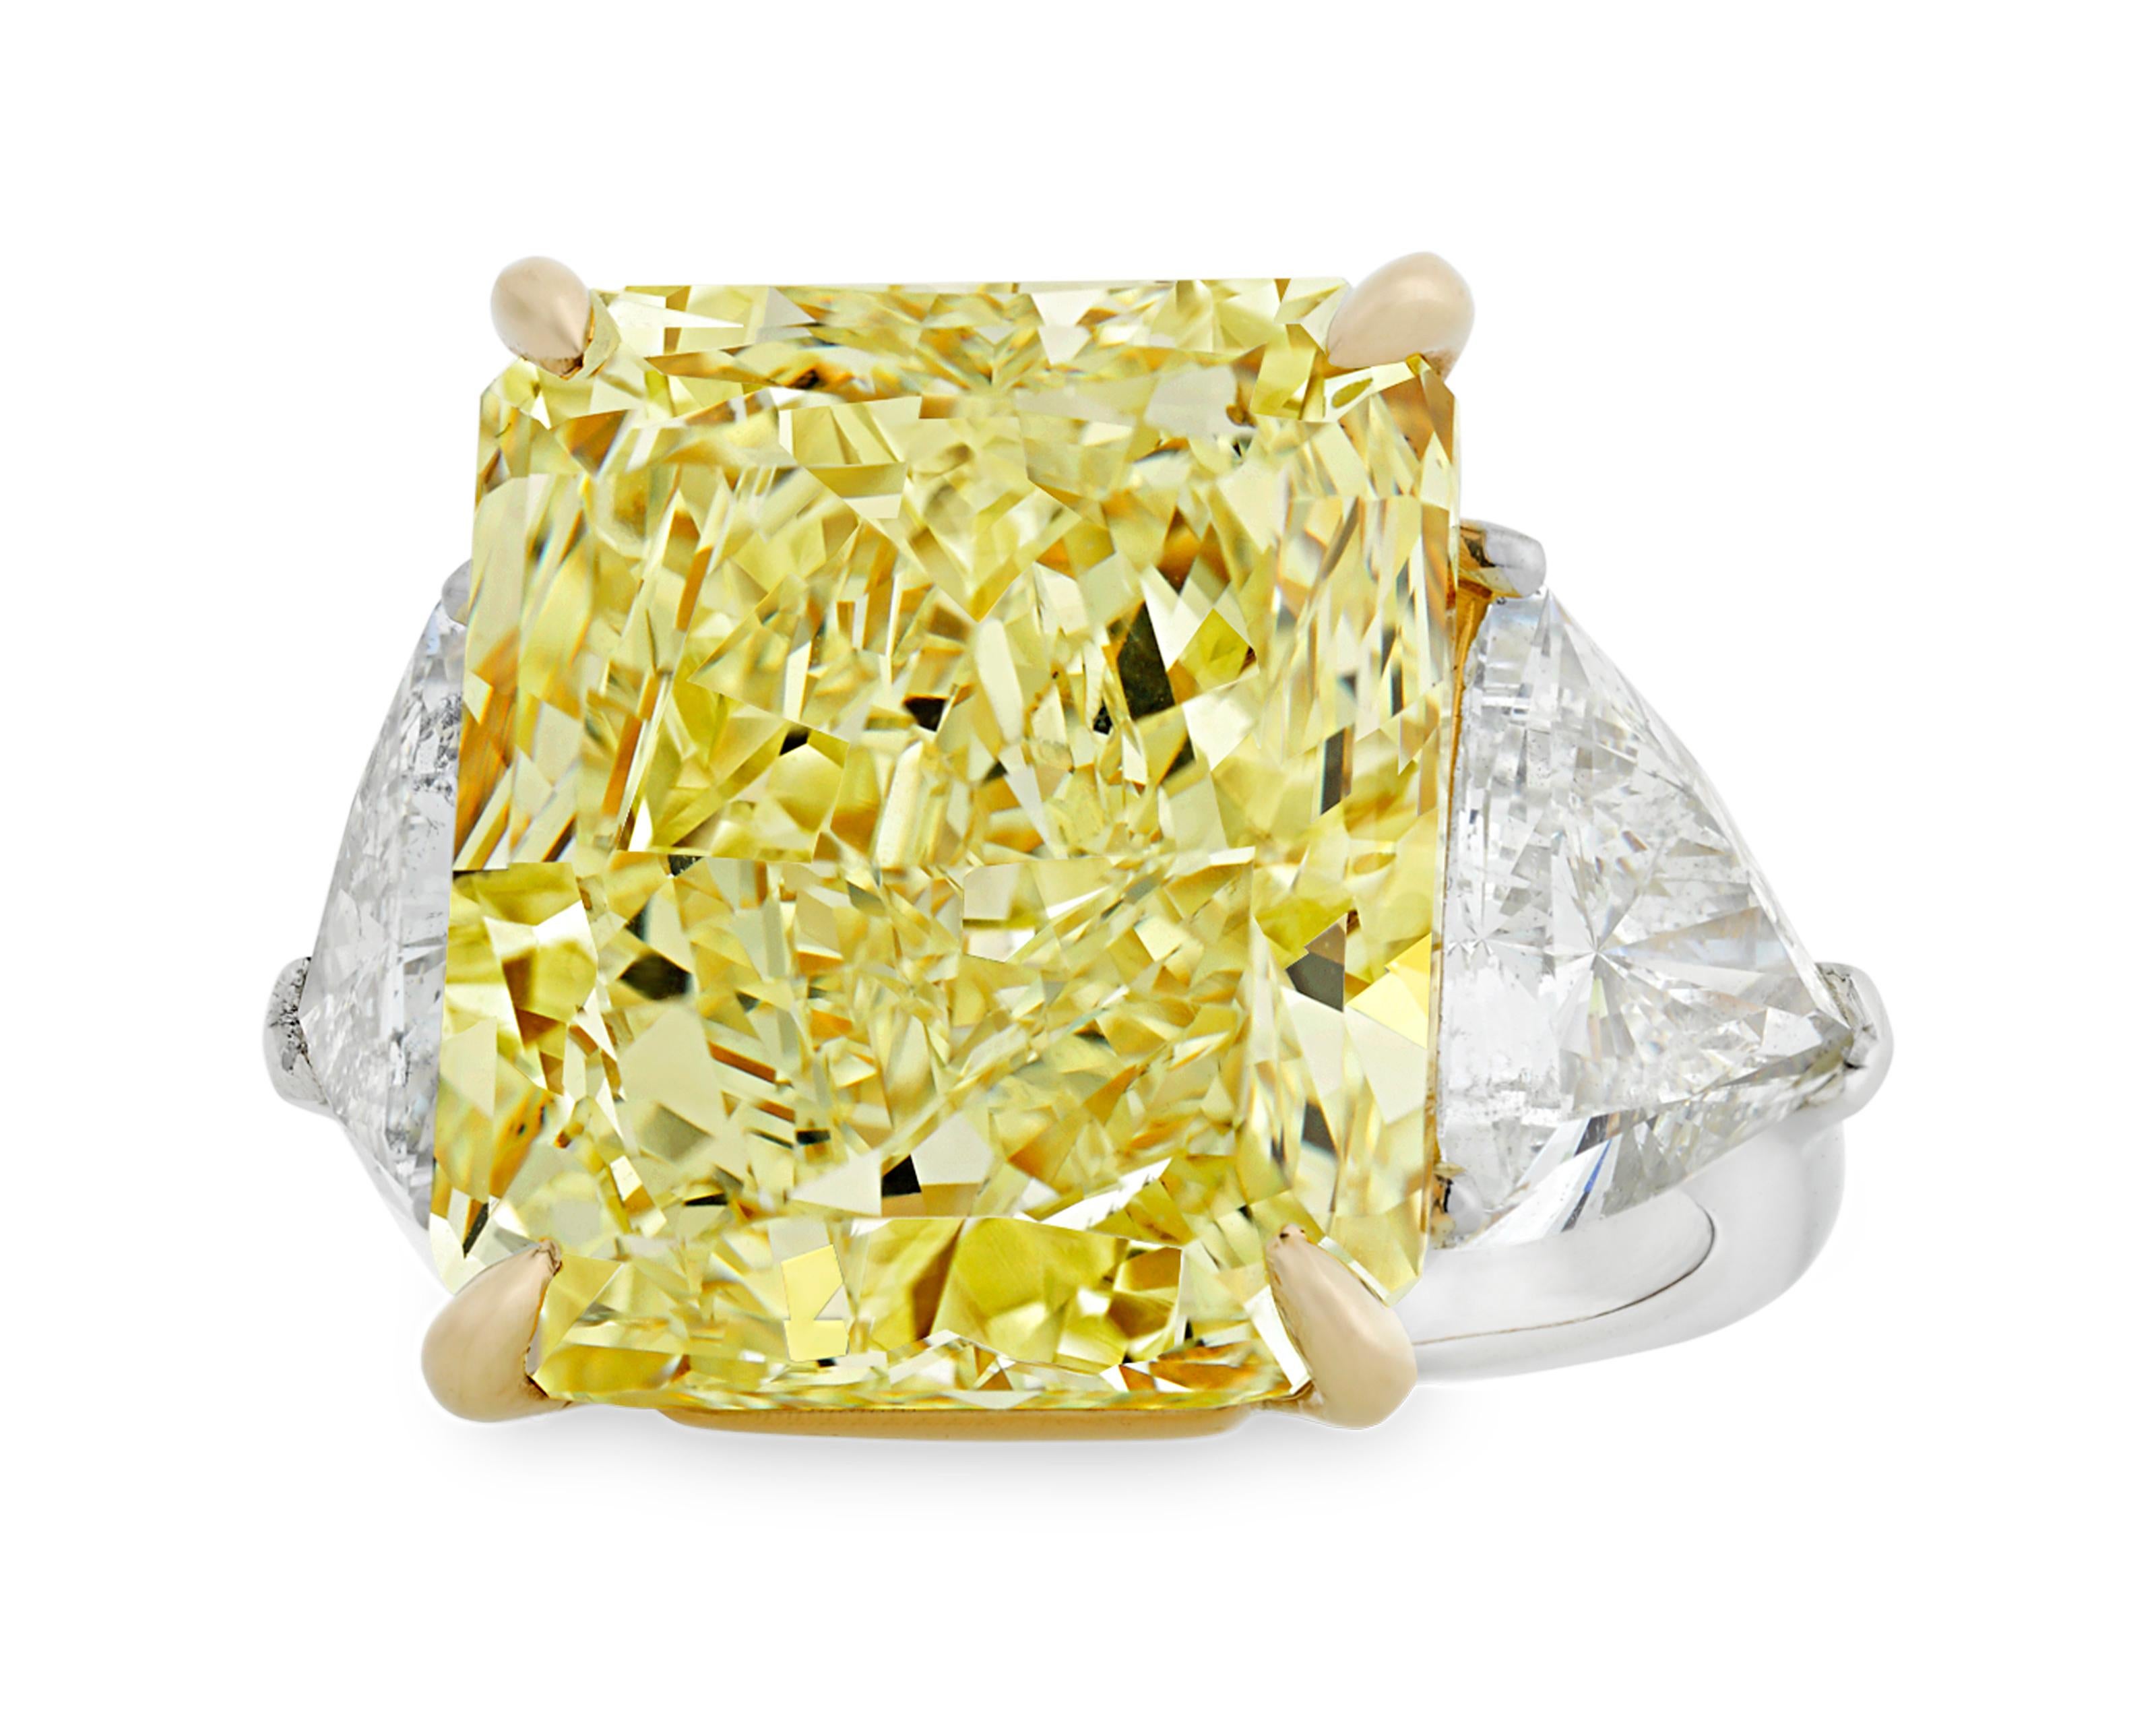 This monumental 20.28-carat natural fancy yellow diamond ranks among the rarest and most coveted of all gemstones. The rare stone is certified by the Gemological Institute of America (GIA) as natural fancy yellow, and its exceptional hue displays